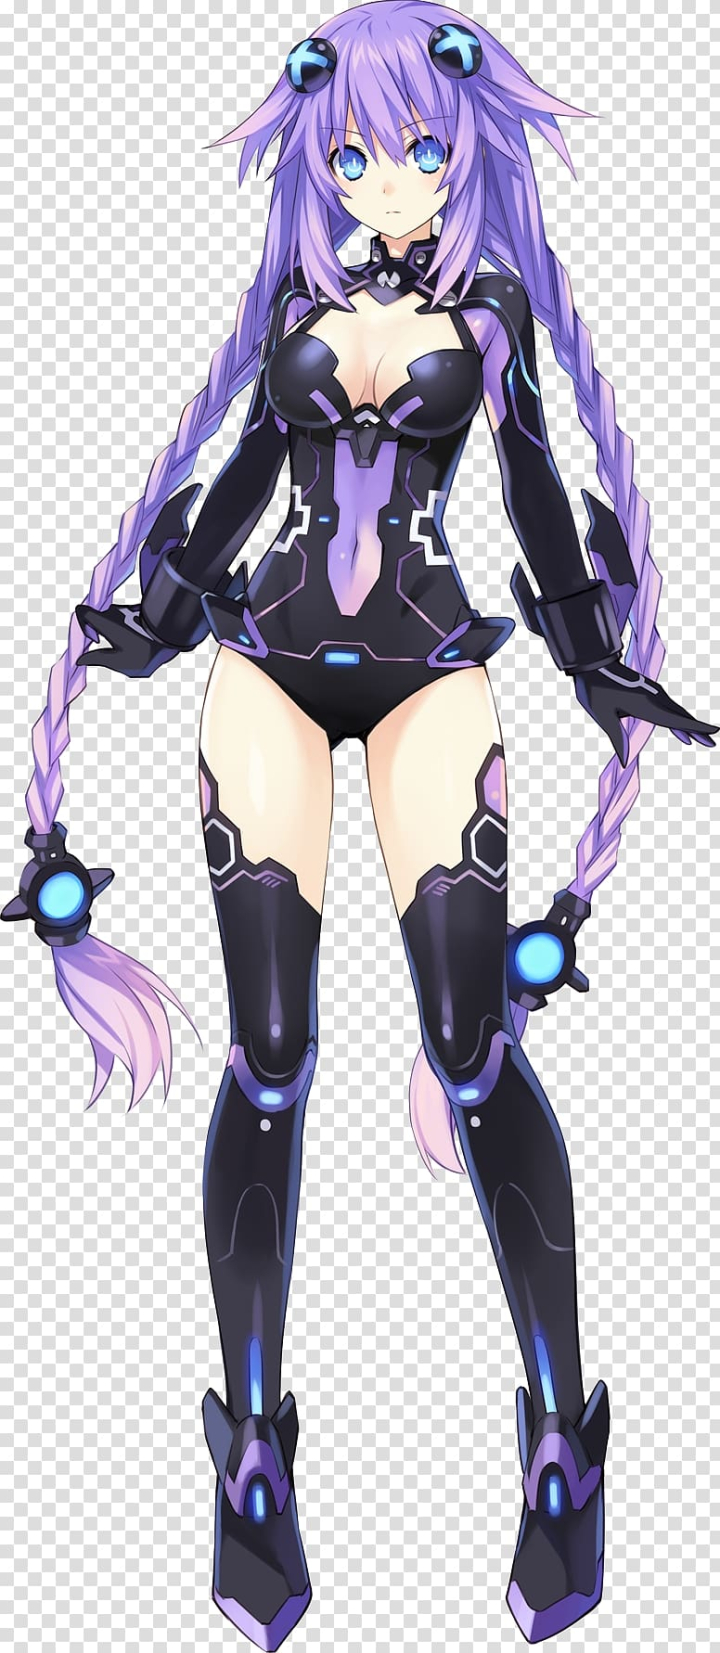 hyperdimension,neptunia,victory,mk,megadimension,vii,cyberdimension,hyperdevotion,noire,goddess,black,heart,purple,black hair,violet,video game,fictional character,latex clothing,cyberdimension neptunia 4 goddesses online,purple heart,mangaka,minecraft,nippon ichi software,playstation 3,playstation vita,tsunako,supernatural creature,action figure,long hair,anime,brown hair,cosplay,costume,costume design,figurine,gaming,human hair color,hyperdevotion noire goddess black heart,hyperdimension neptunia,wiki,hyperdimension neptunia victory,hyperdimension neptunia mk2,megadimension neptunia vii,goddesses,online,hyperdevotion noire: goddess black heart,png clipart,free png,transparent background,free clipart,clip art,free download,png,comhiclipart